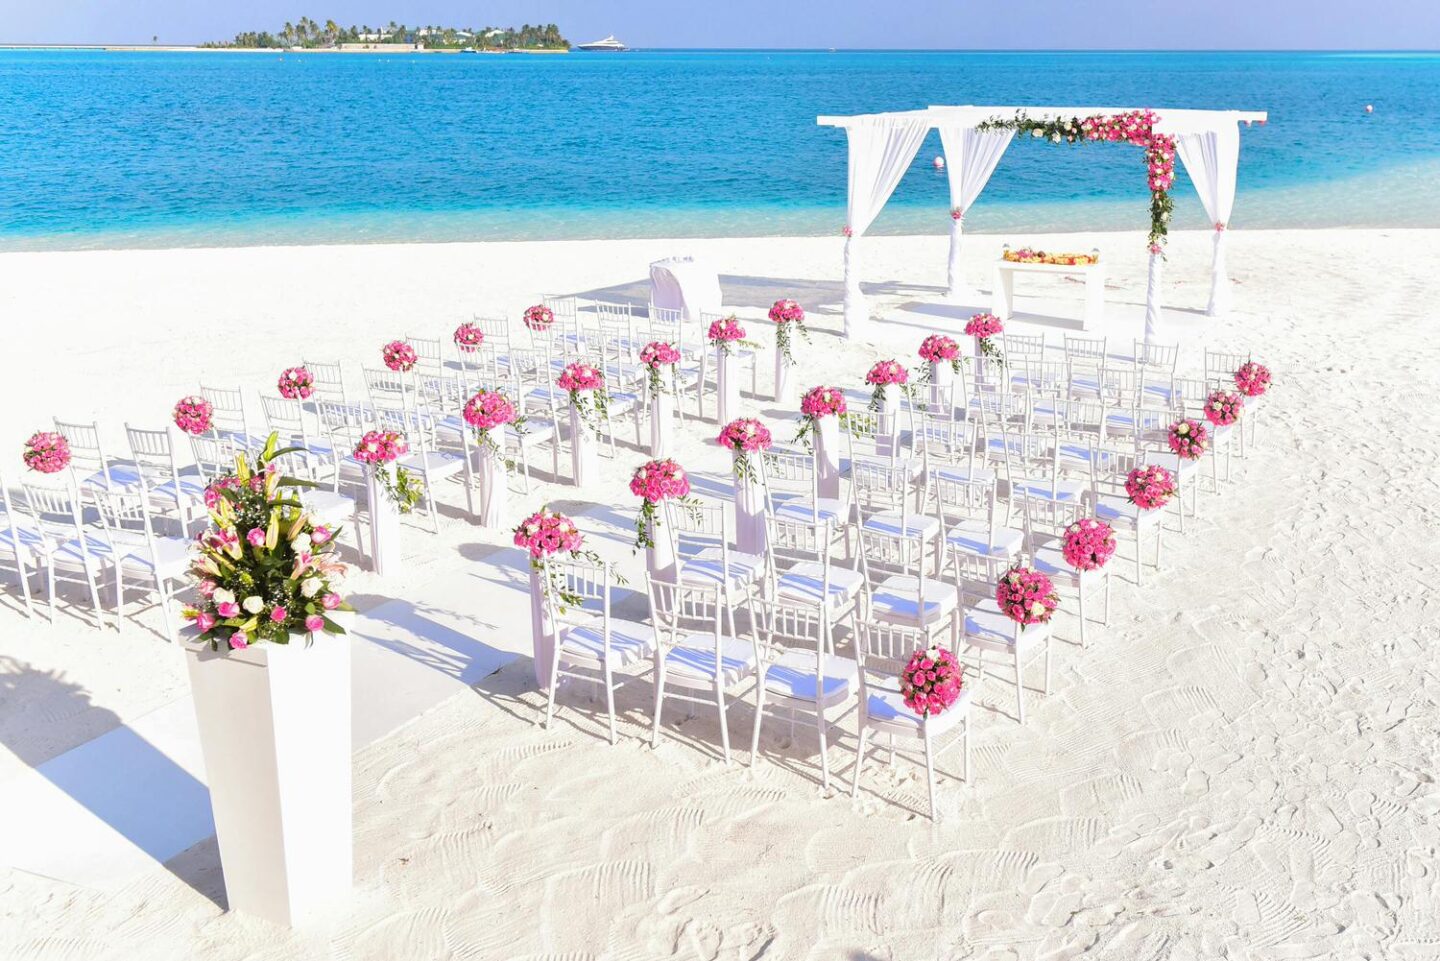 Tips and Tricks for Stunning Shots in a Destination Wedding